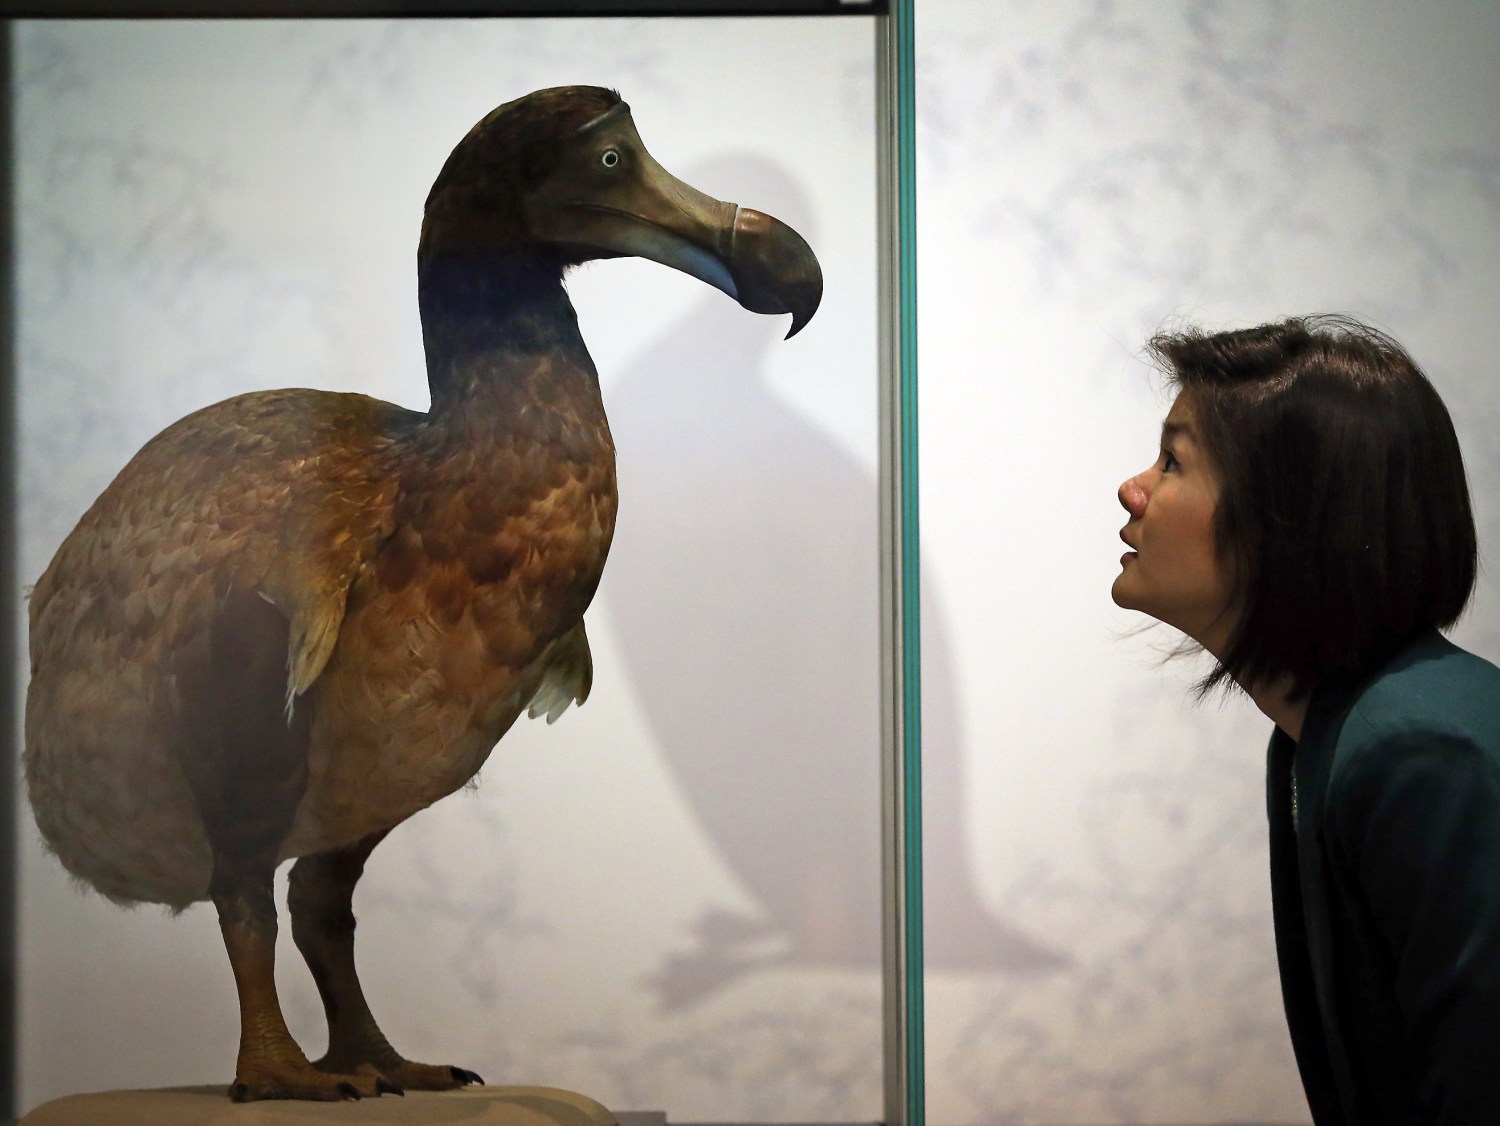 When did the dodo go extinct? Maybe later than we thought